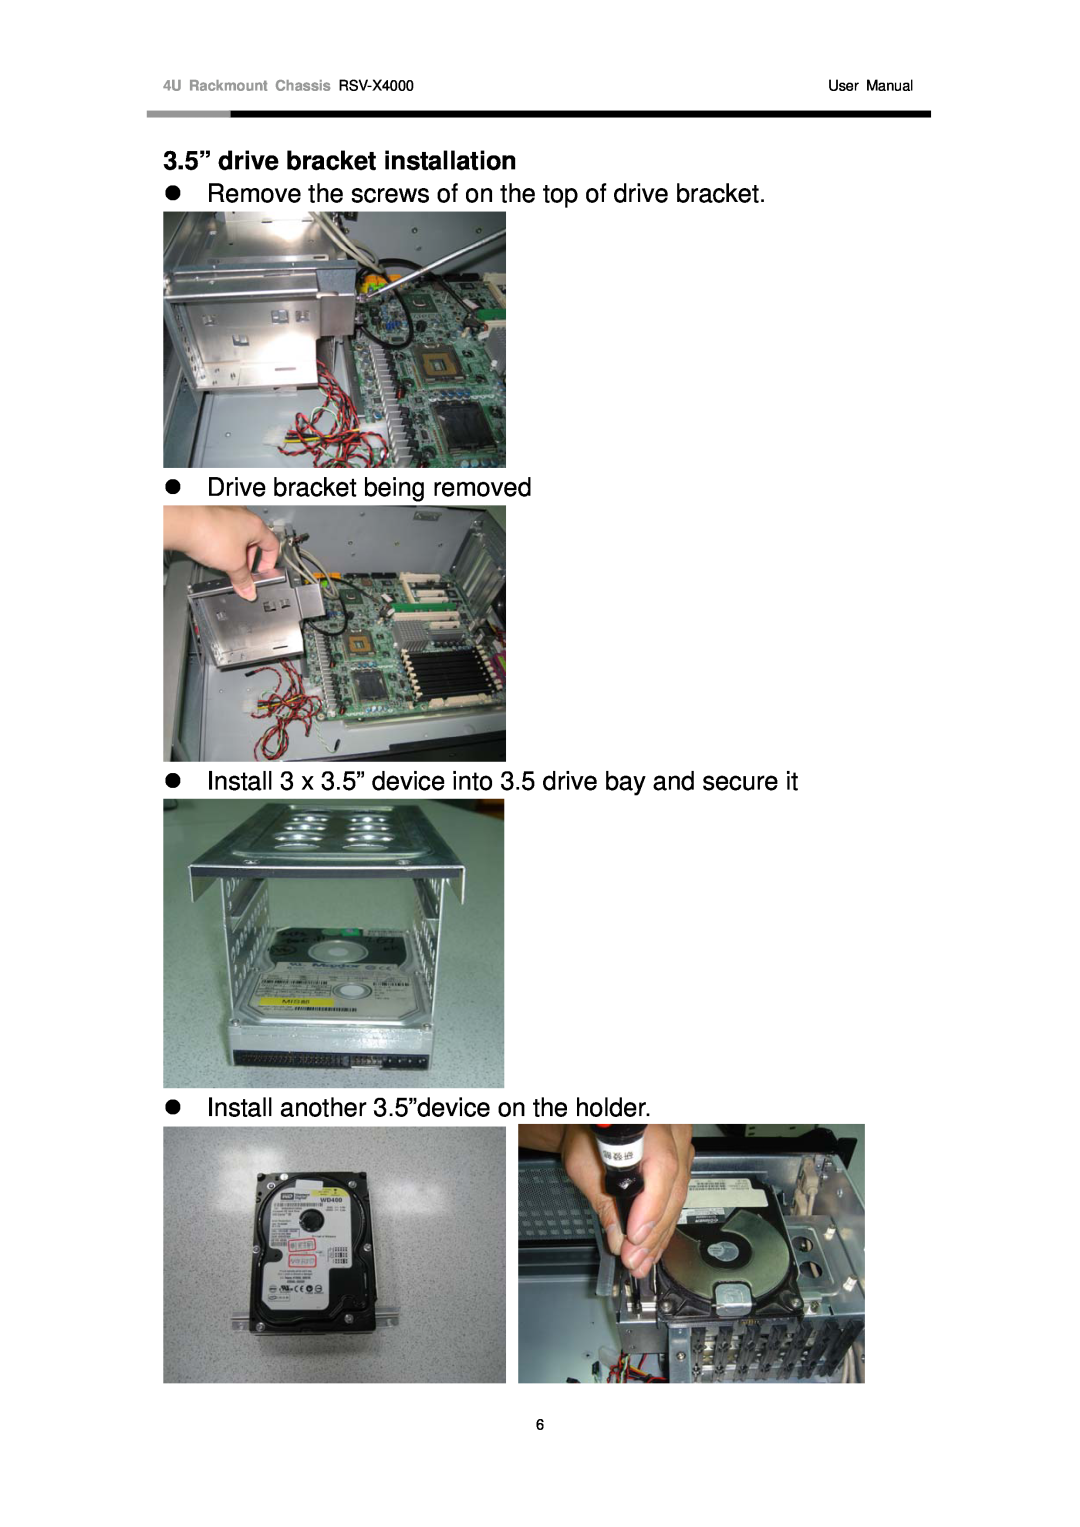 Rosewill RSV-X4000 3.5” drive bracket installation, z Remove the screws of on the top of drive bracket, User Manual 